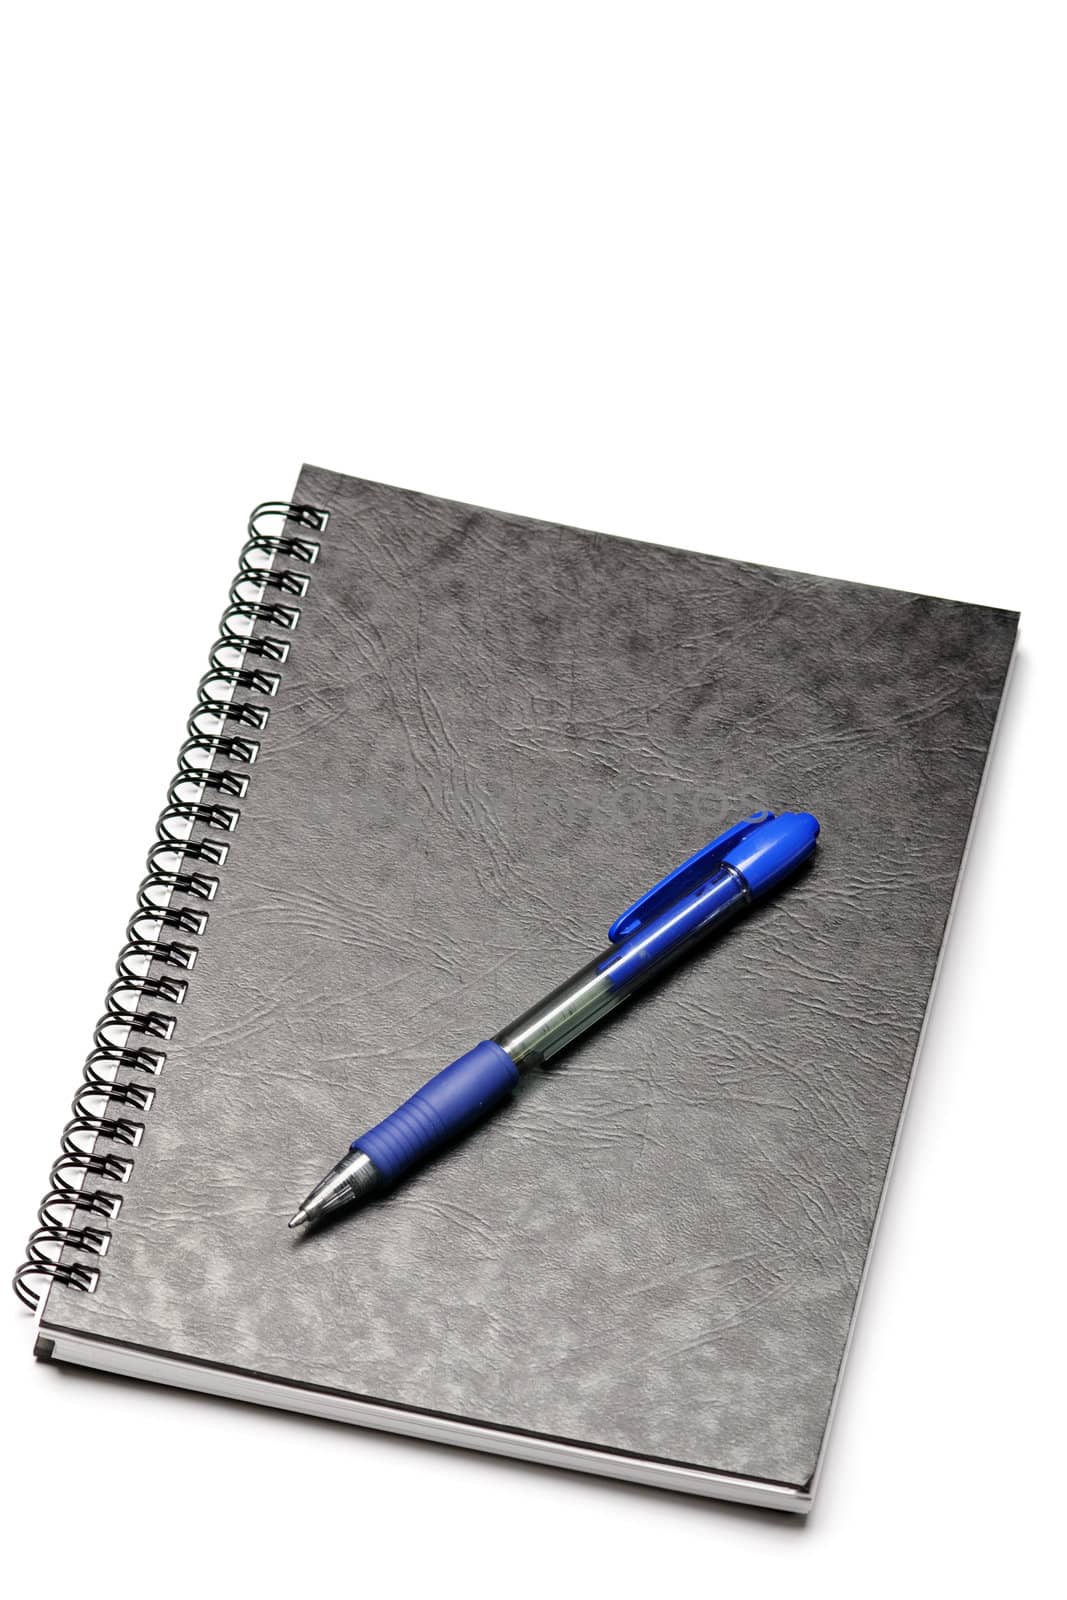 Black spiral notebook and pen isolated on white backround